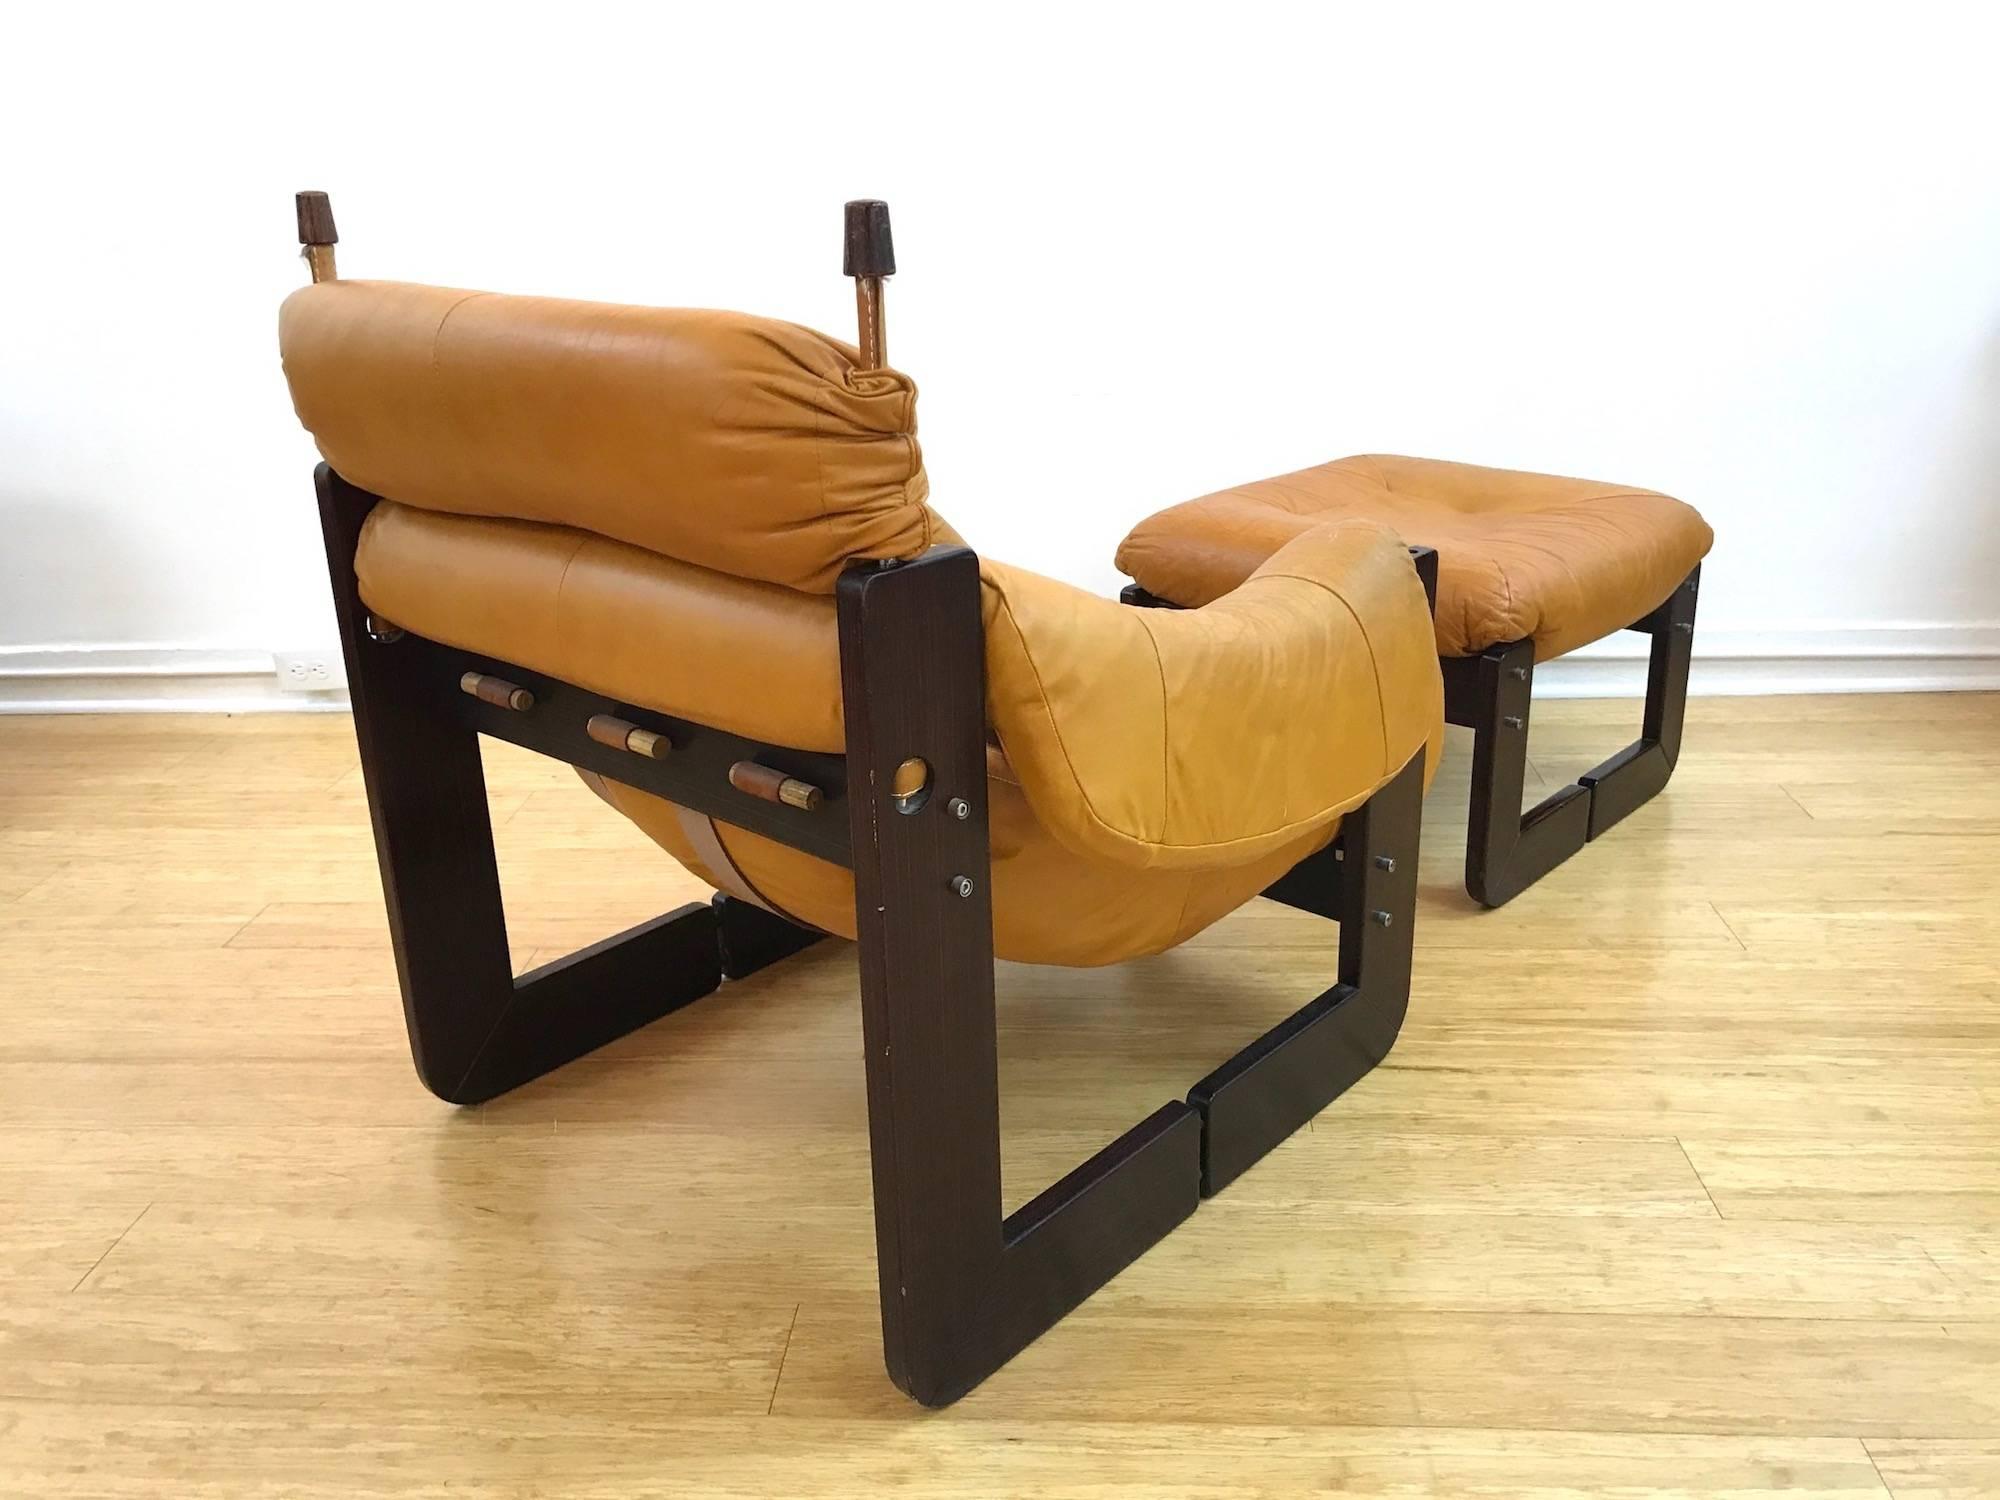 Late 20th Century Brazilian Midcentury Percival Lafer Chair and Ottoman in Leather and Jatobah